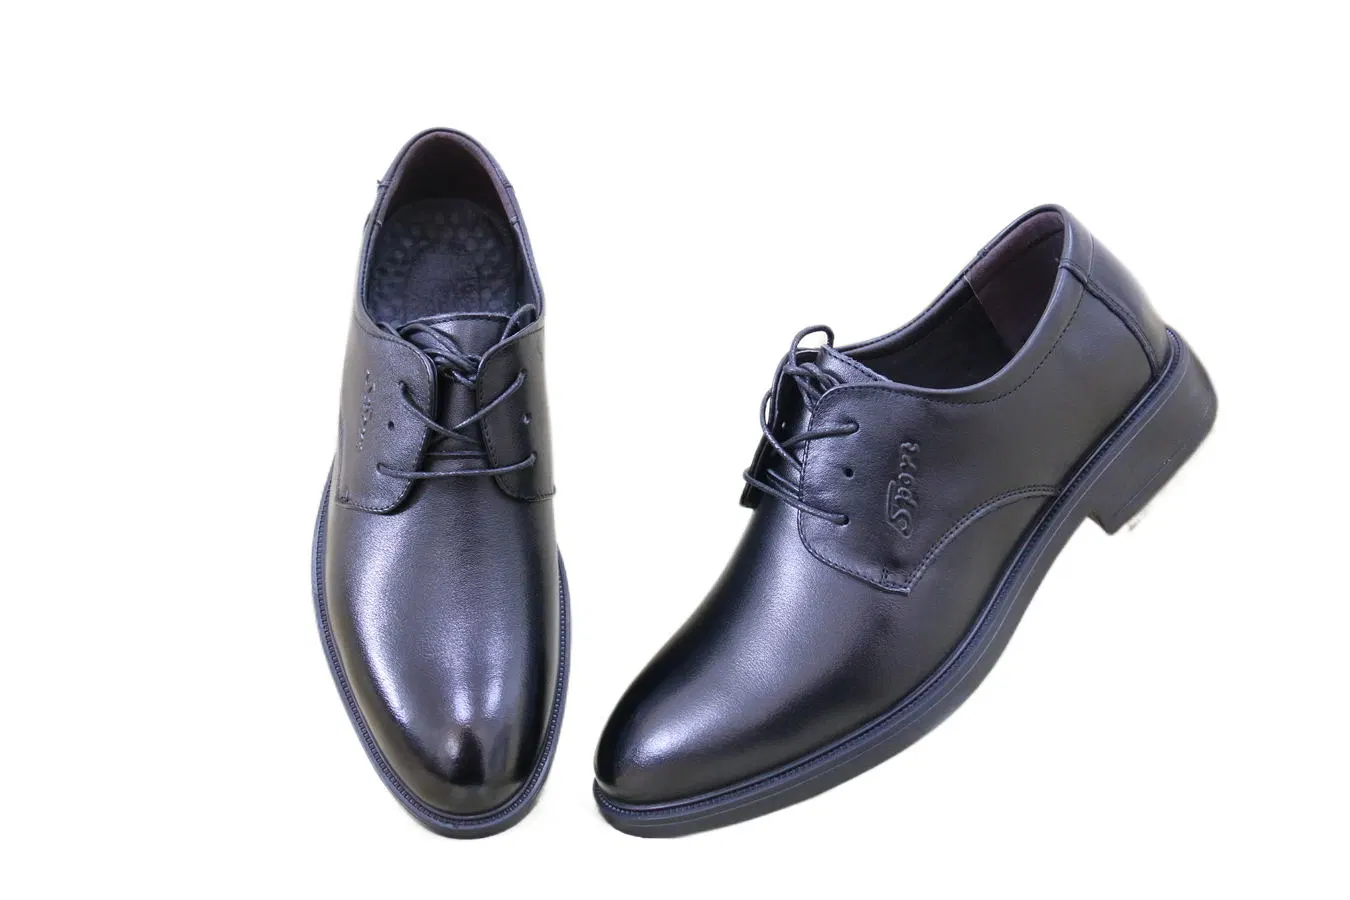 Classic Christmas New Year Luxury Oxford Design Leather Men Dress Wedding Business Work Party Office Shoe